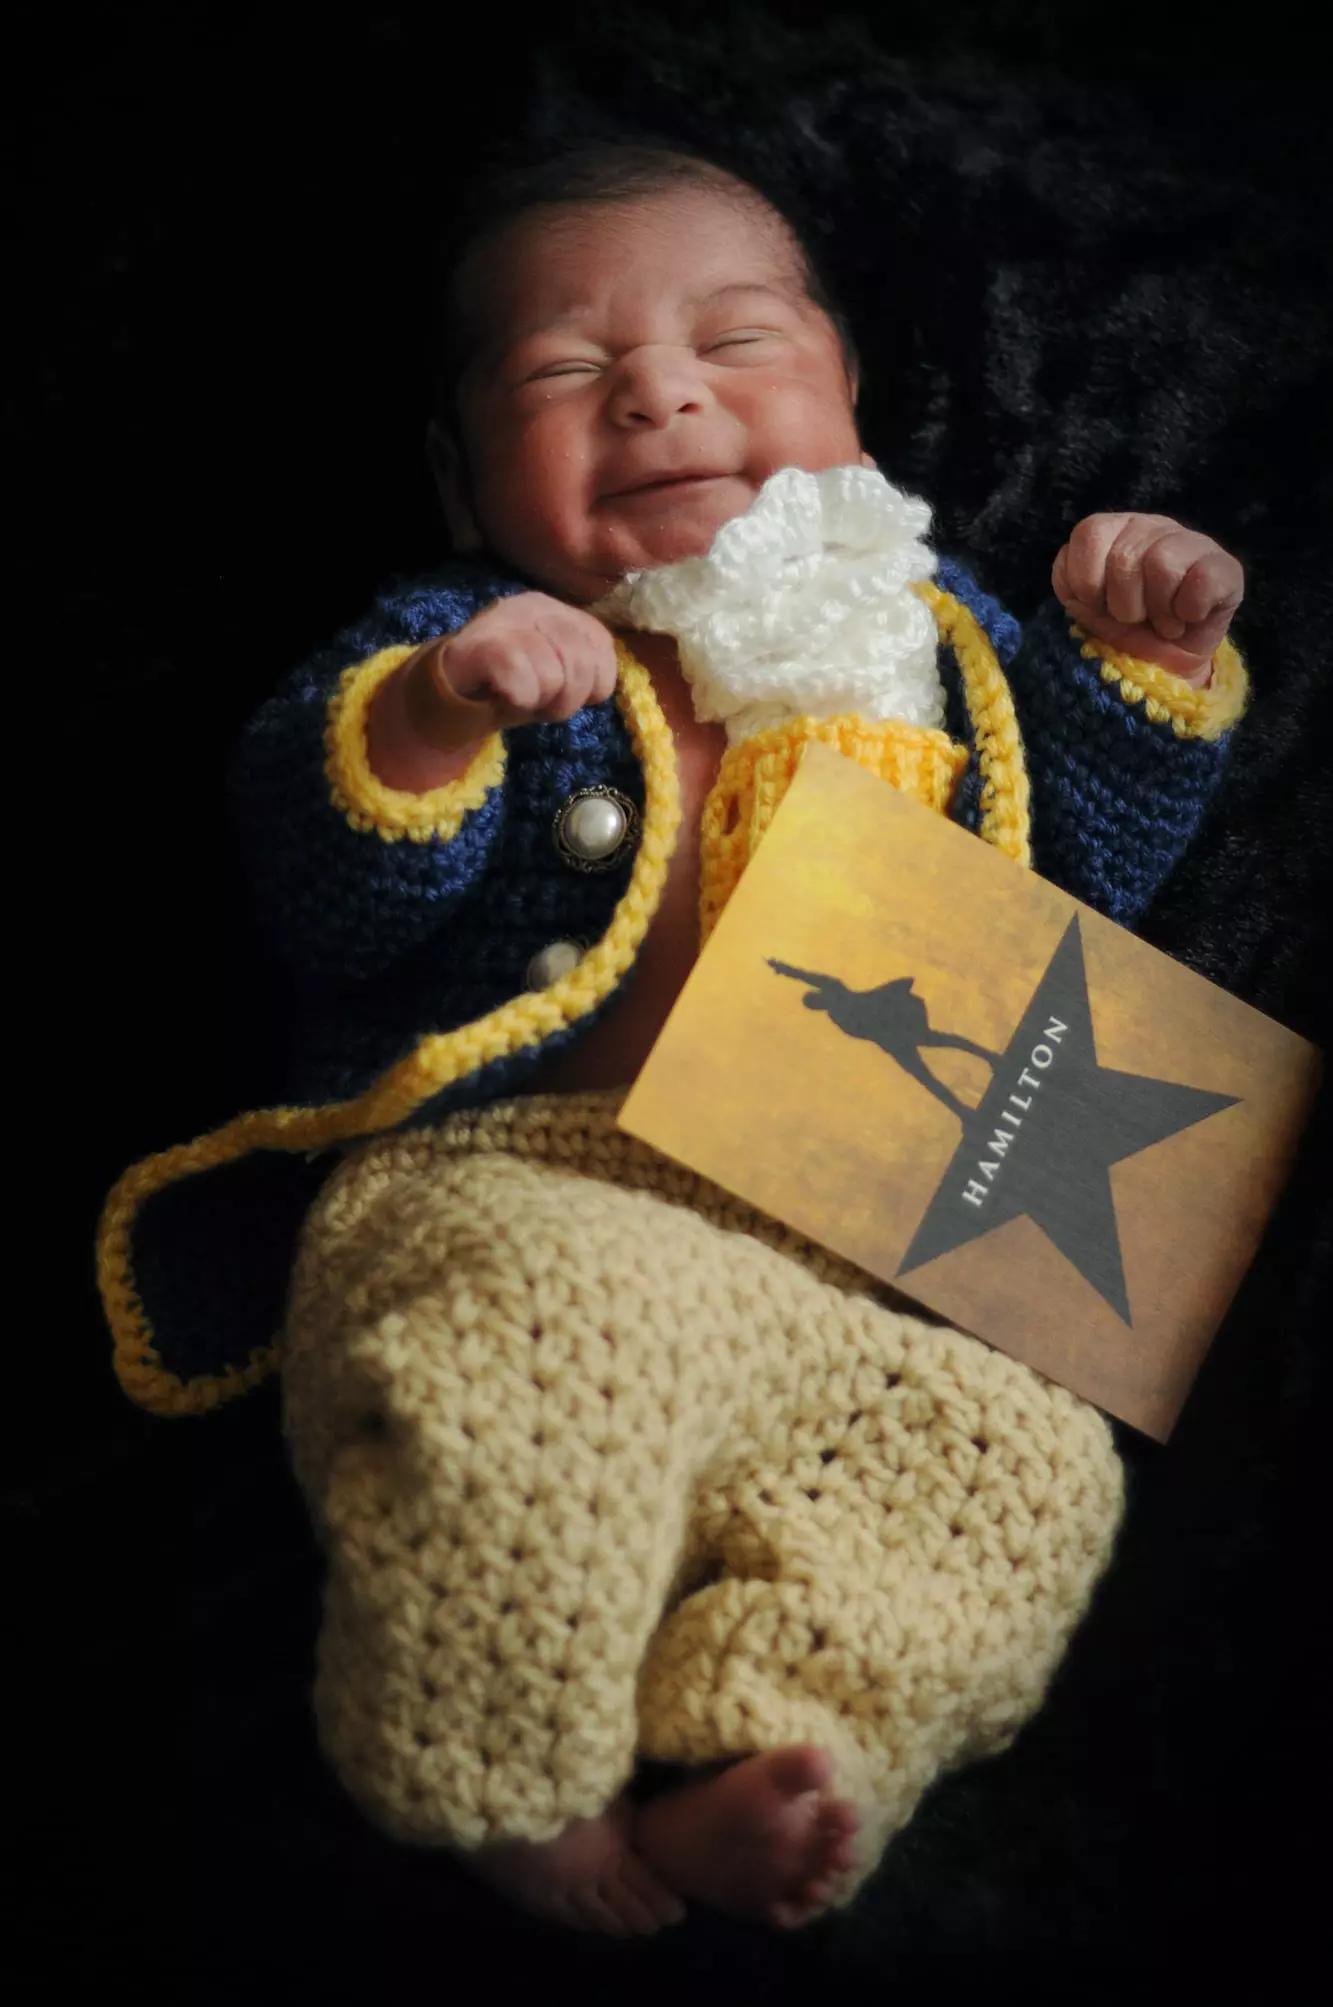 Baby dressed as Hamilton from the musical